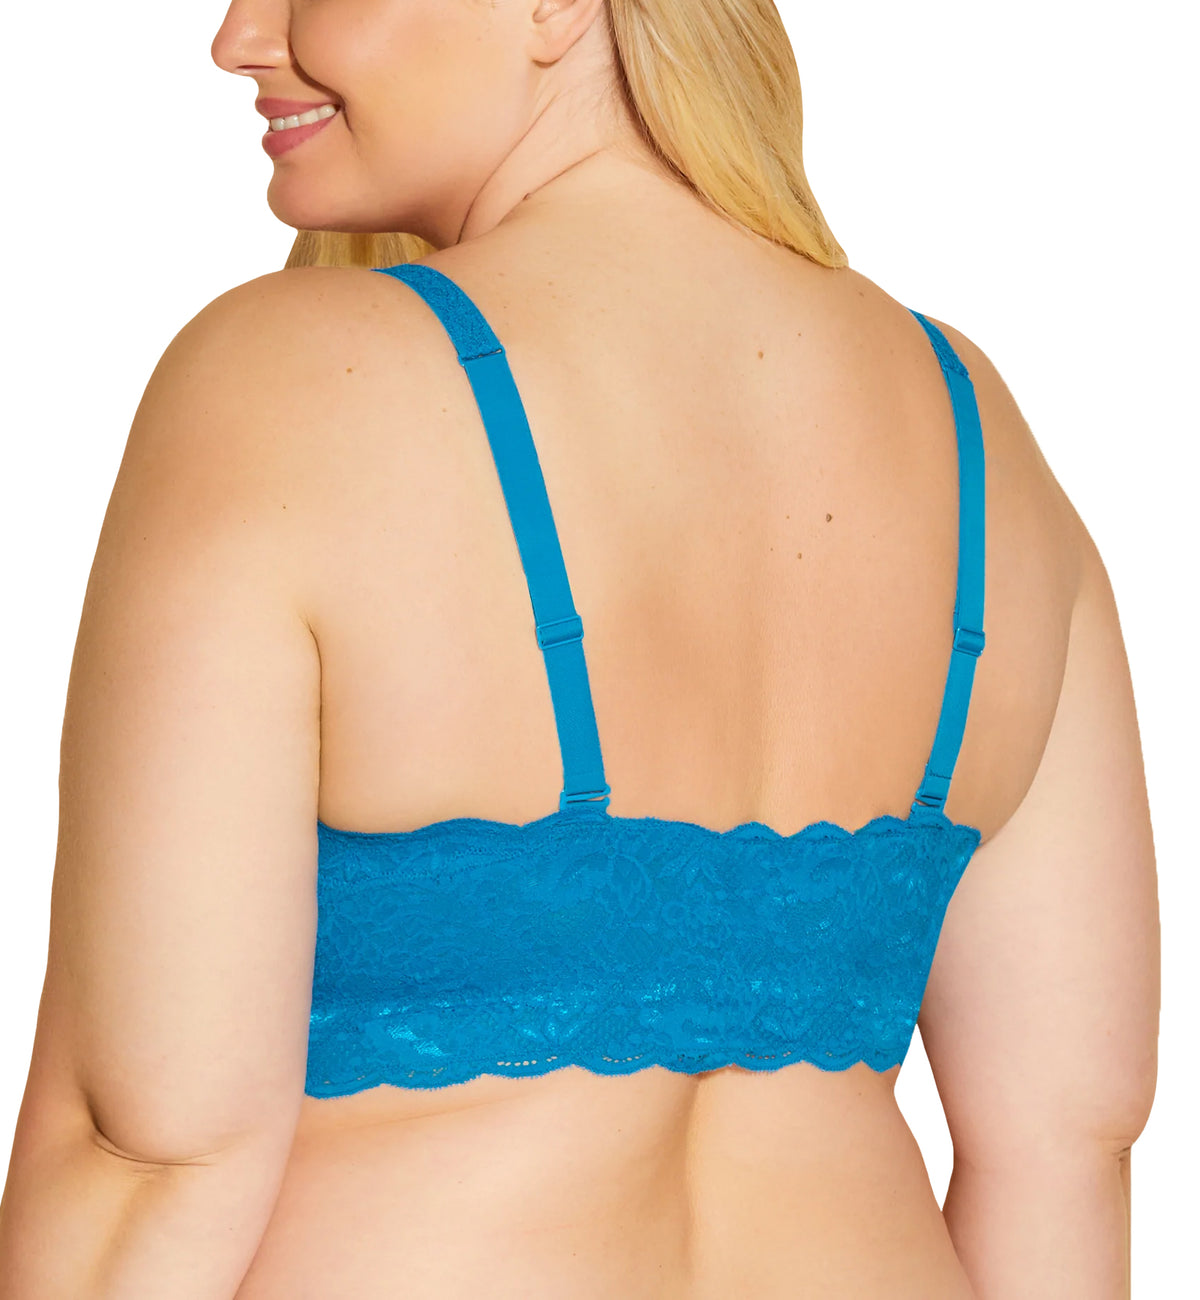 Cosabella NSN ULTRA CURVY Sweetie Bralette (NEVER1321),XS,Udaipur Blue - Udaipur Blue,XS